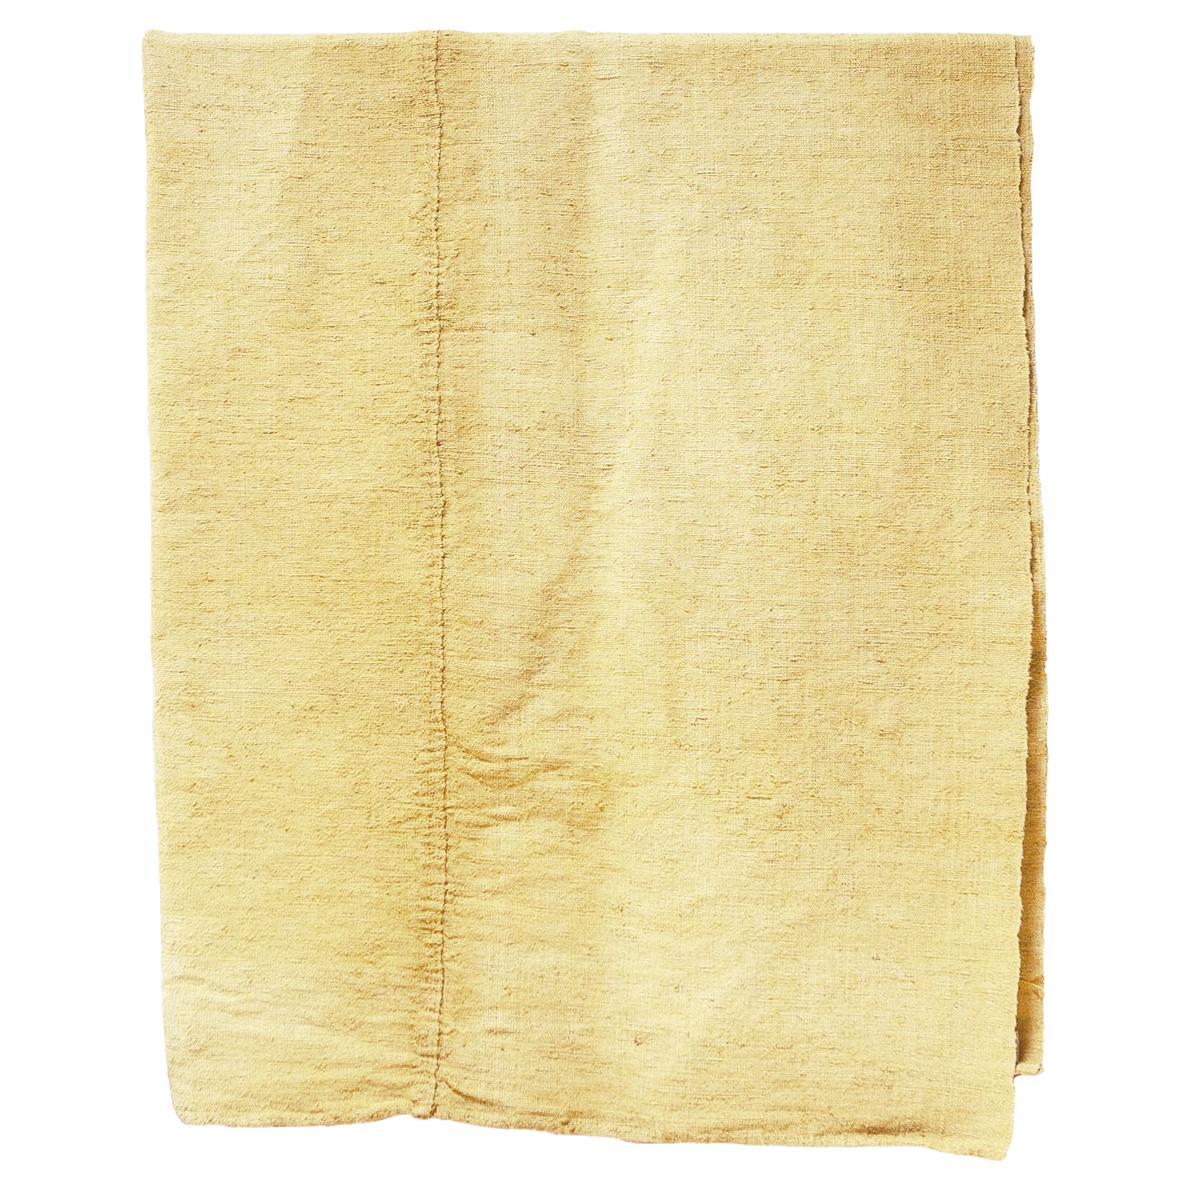 Espanyolet Pale Yellow Hand Painted Vintage Linen Throw made in Spain  For Sale